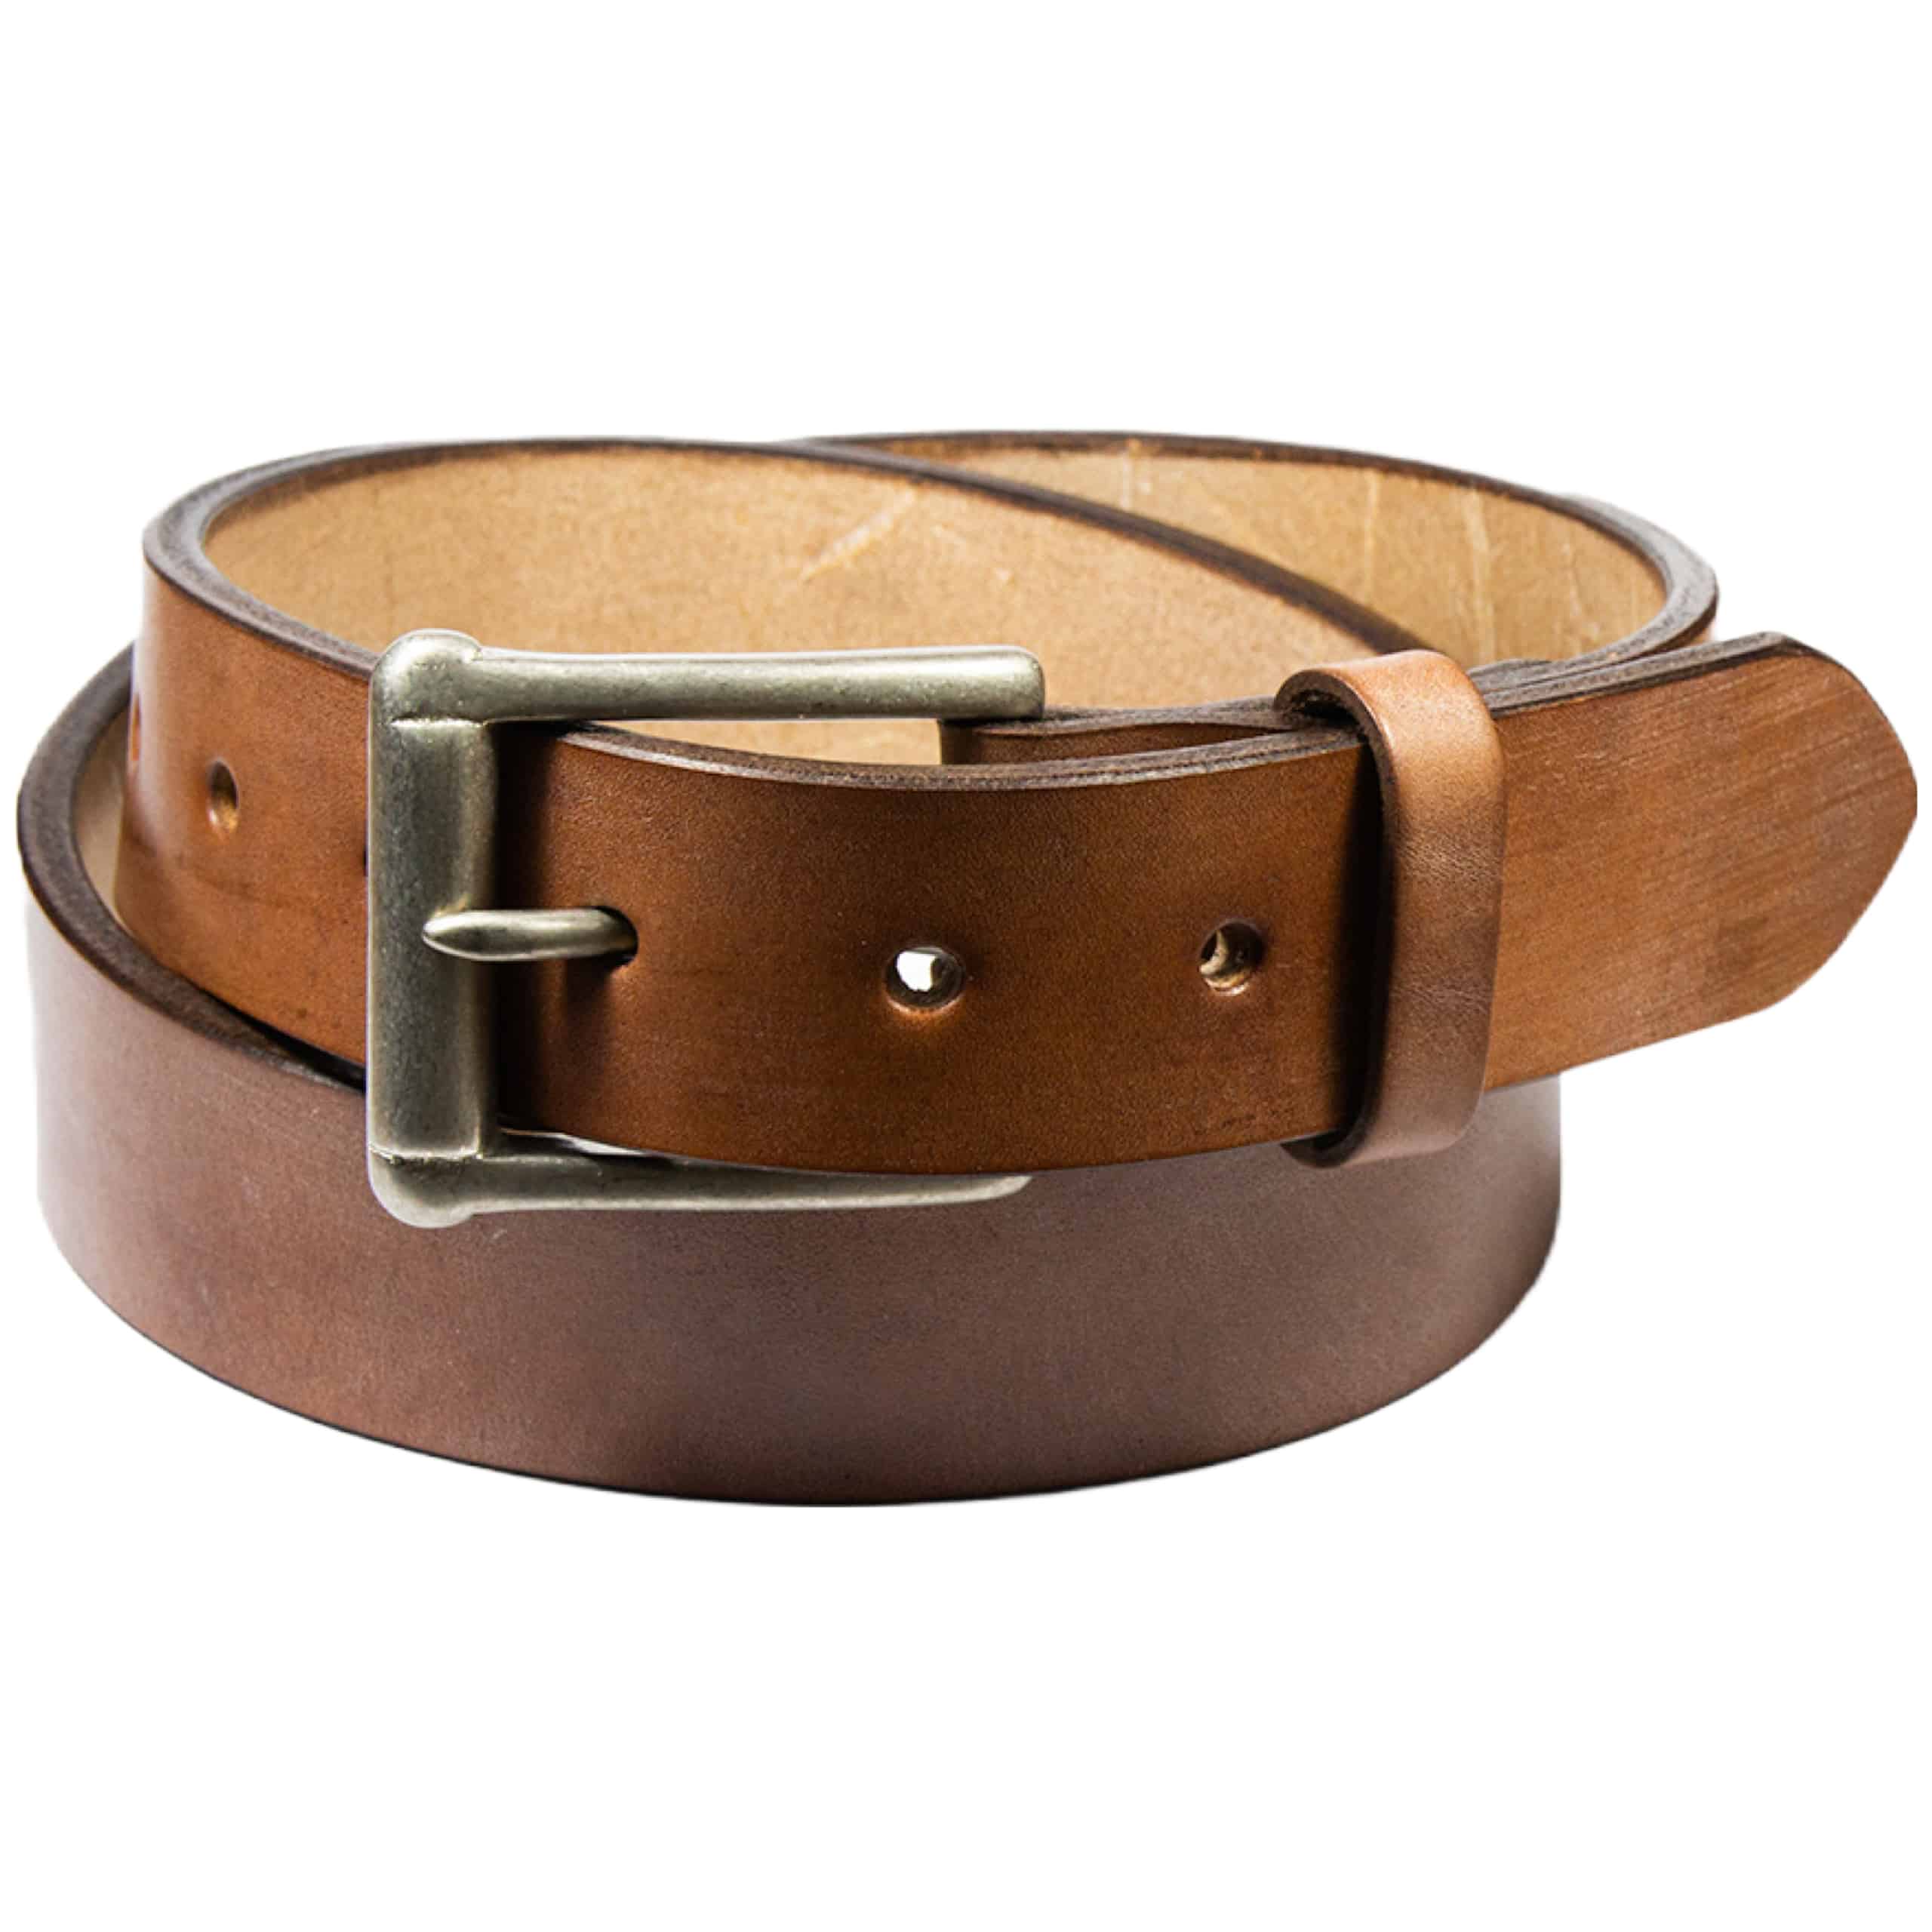 Garrison Leather Belt in Oak Bark leather by Barnes and Moore